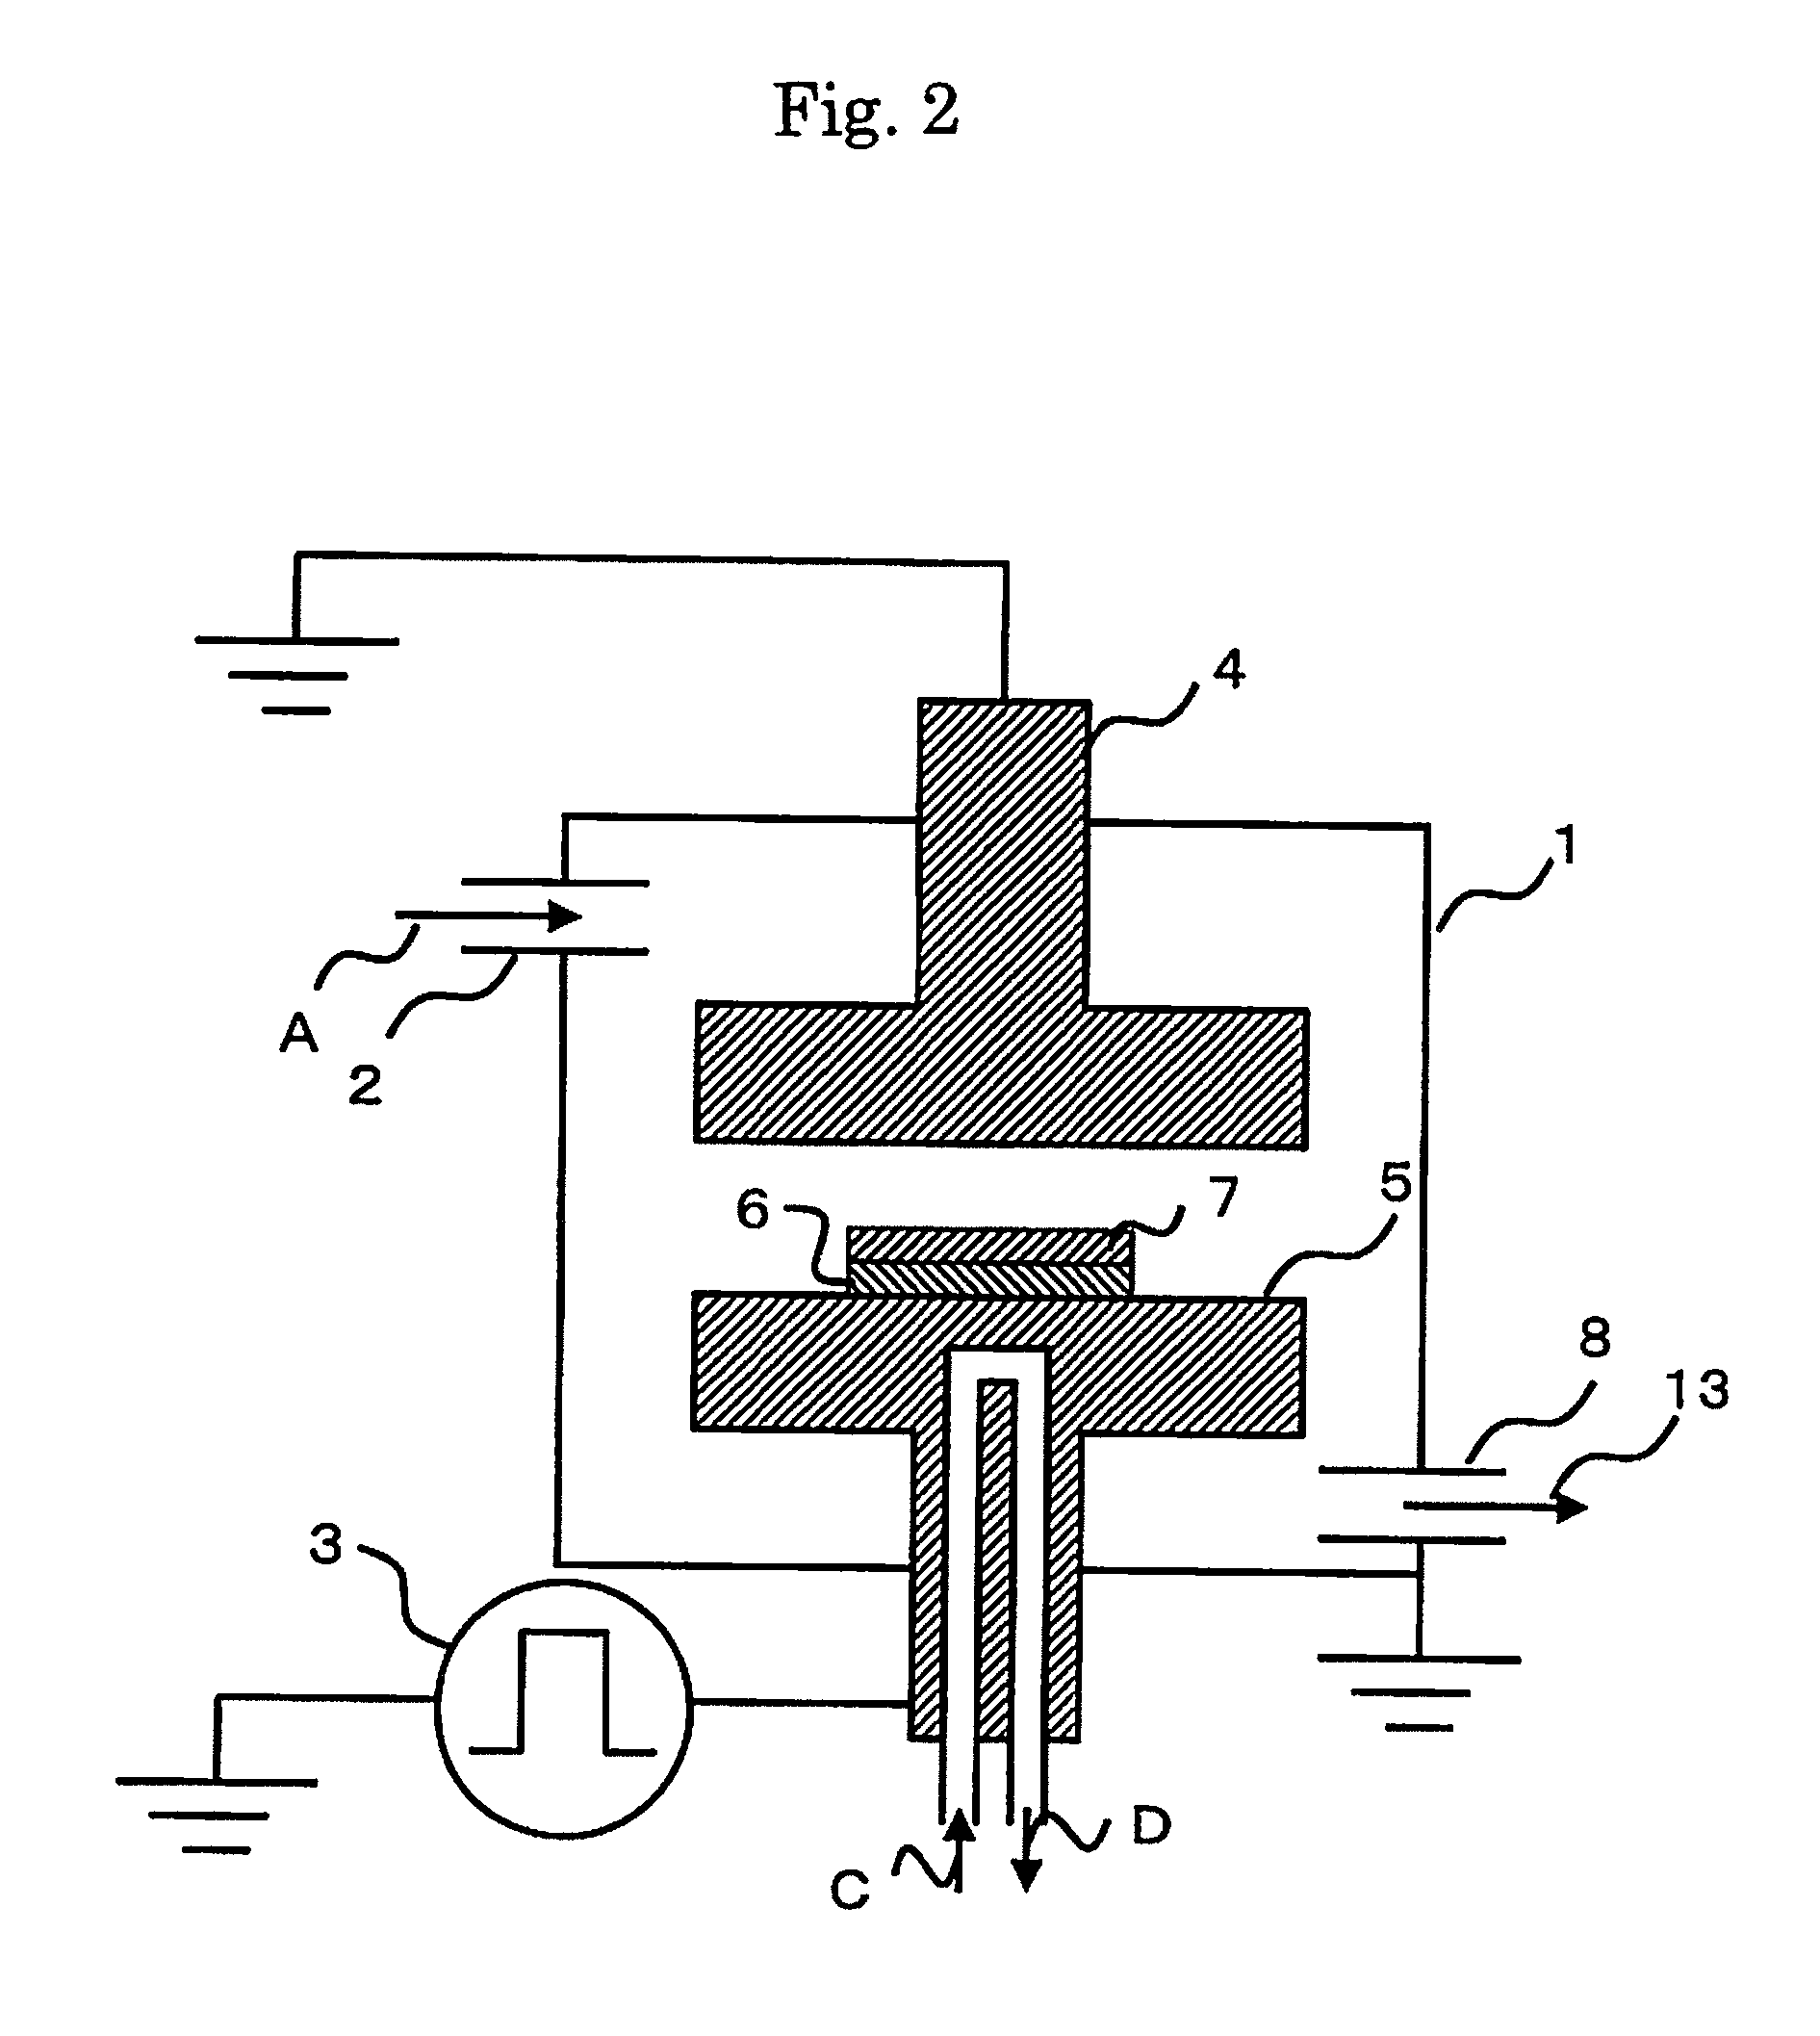 Methods of generating plasma, of etching an organic material film, of generating minus ions, of oxidation and nitriding